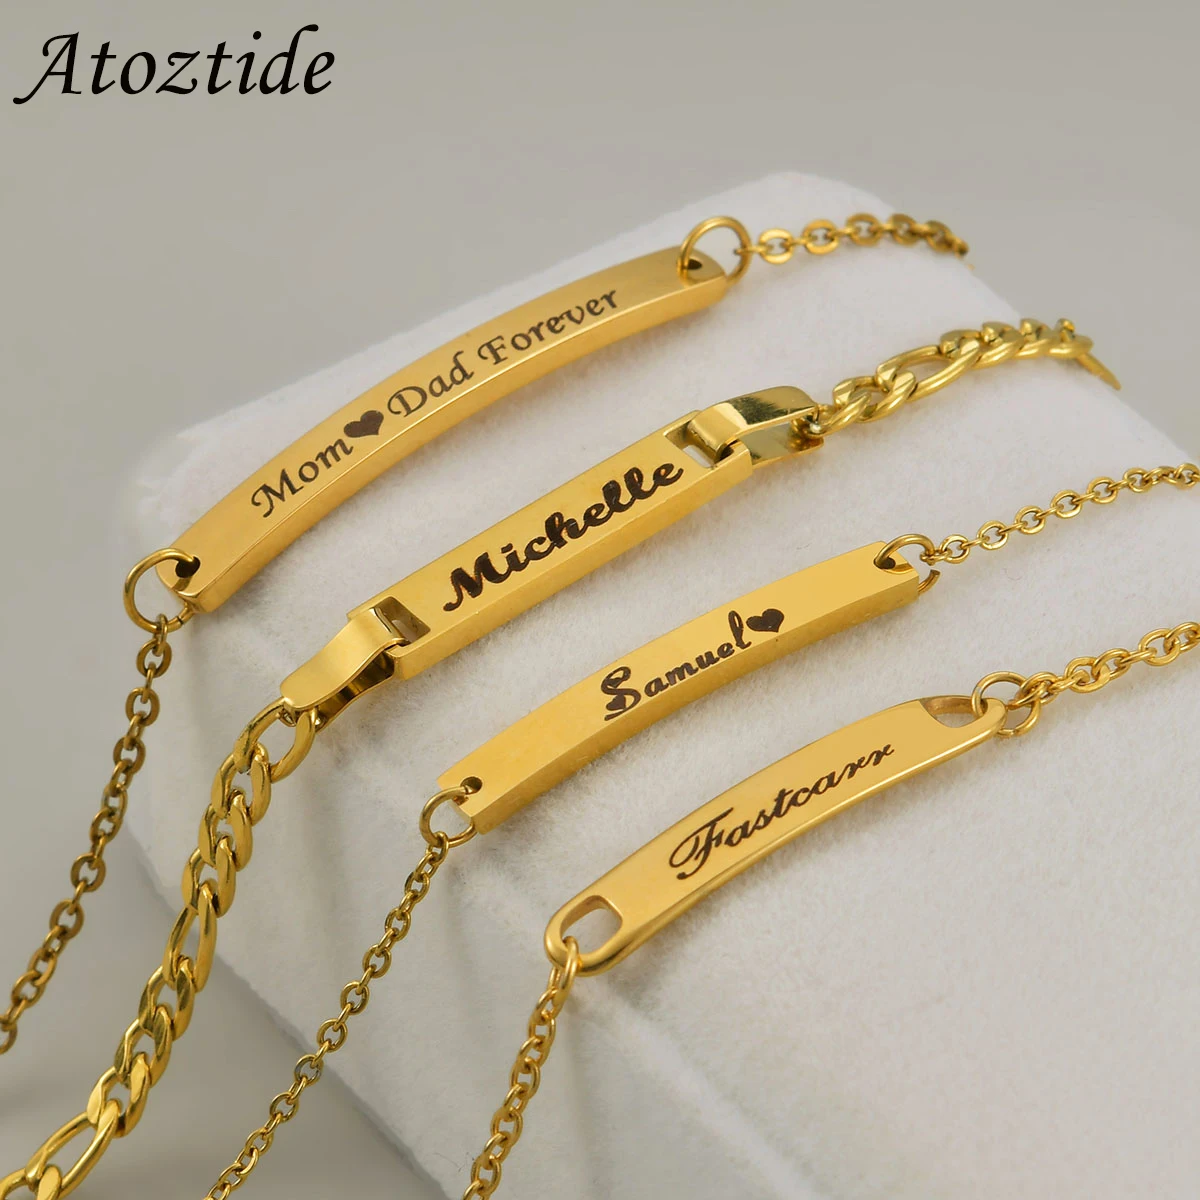 Atoztide Custom Baby Name Bar Nameplate Bracelet For Stainless Steel Women Kids Adjustable Link Chain Personalized Jewelry Gift alcatel радионяня baby link 110